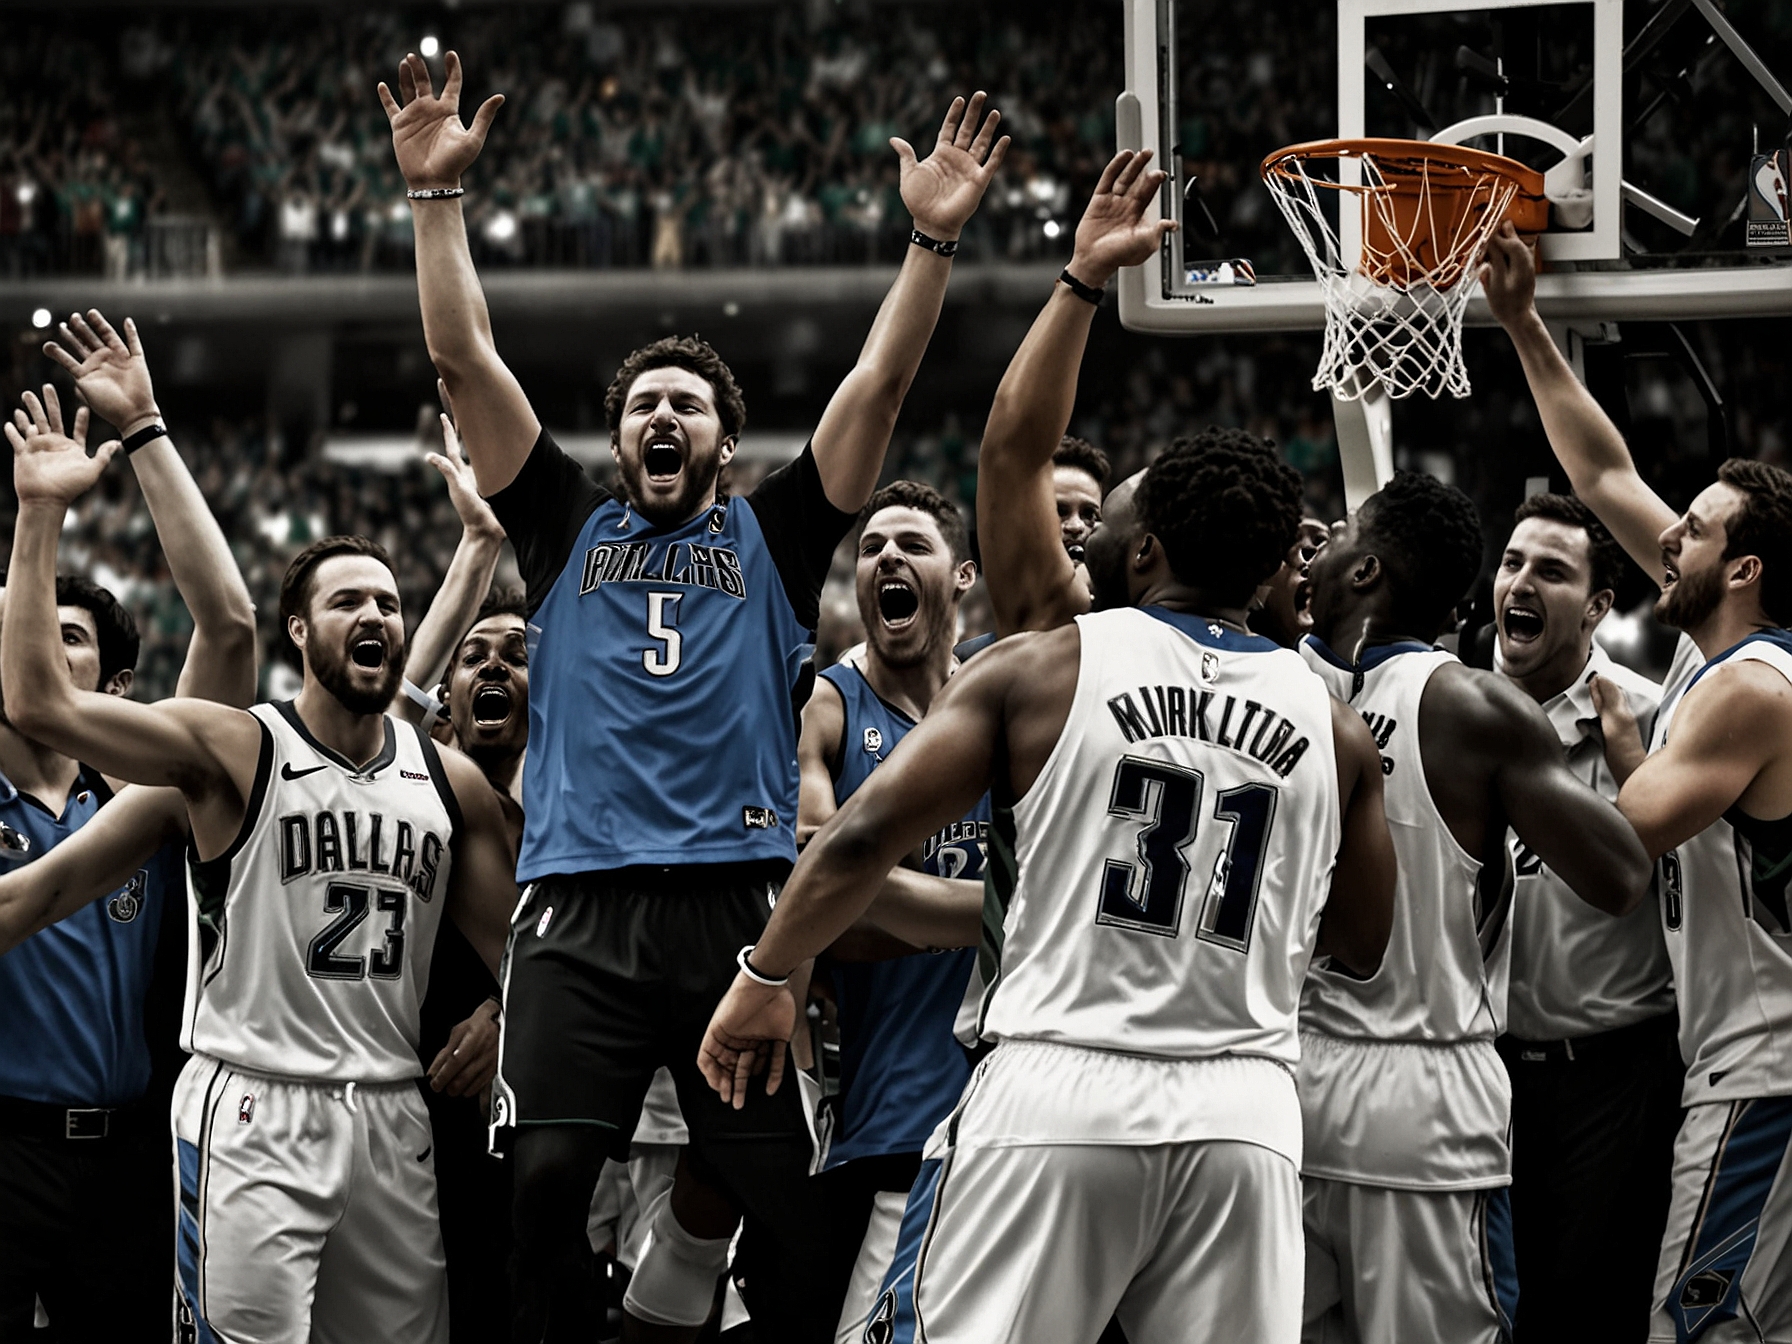 An image showing Dallas Mavericks players celebrating their remarkable 27-point comeback victory against the Boston Celtics in the NBA Finals, showcasing ecstatic team spirit.